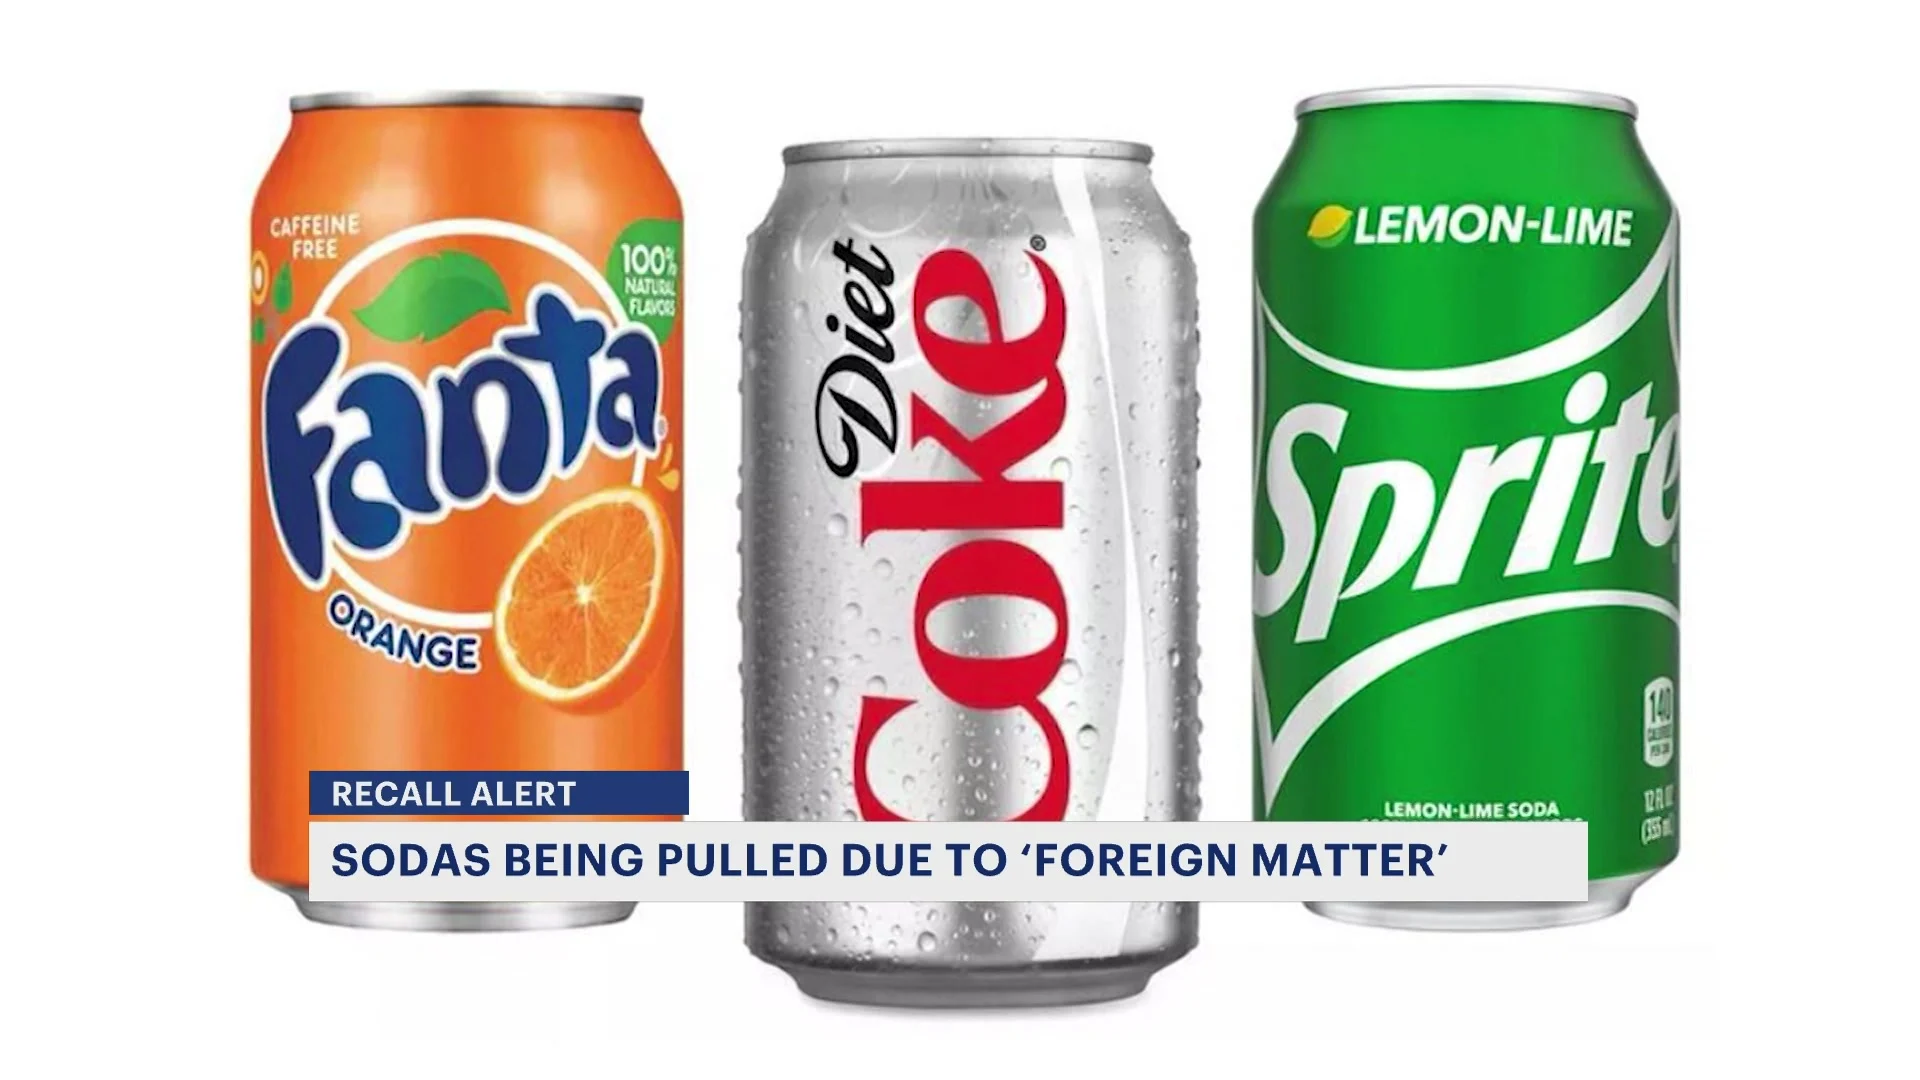 2,000 cases of soda recalled over possible foreign material in cans